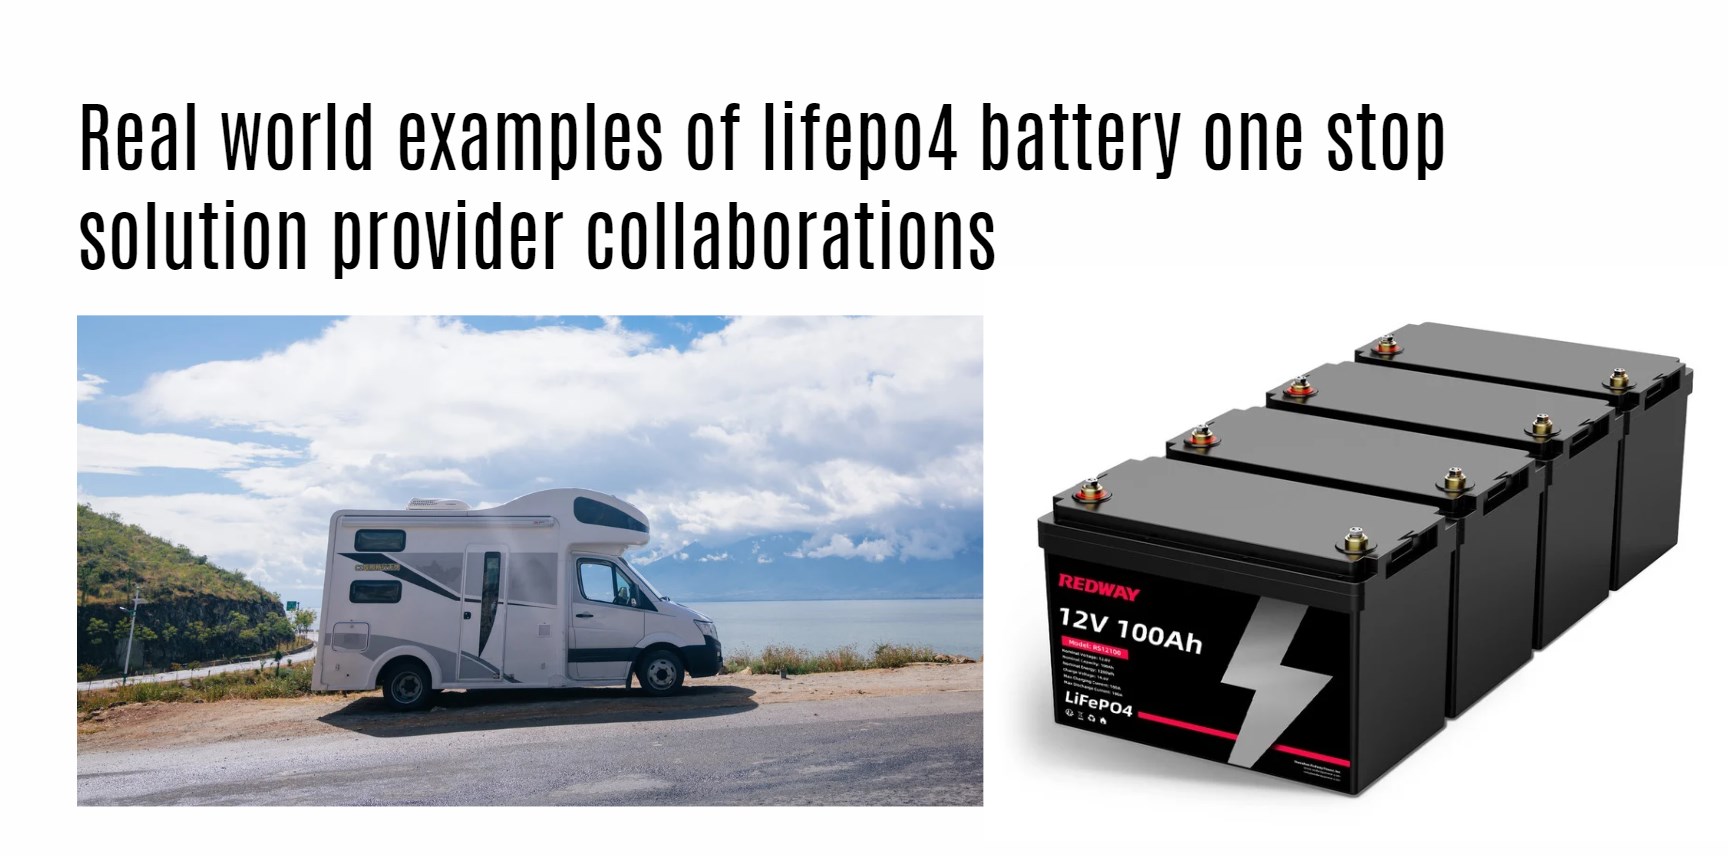 Real world examples of lifepo4 battery one stop solution provider collaborations. 12v 100ah lithium battery factory oem app bluetooth